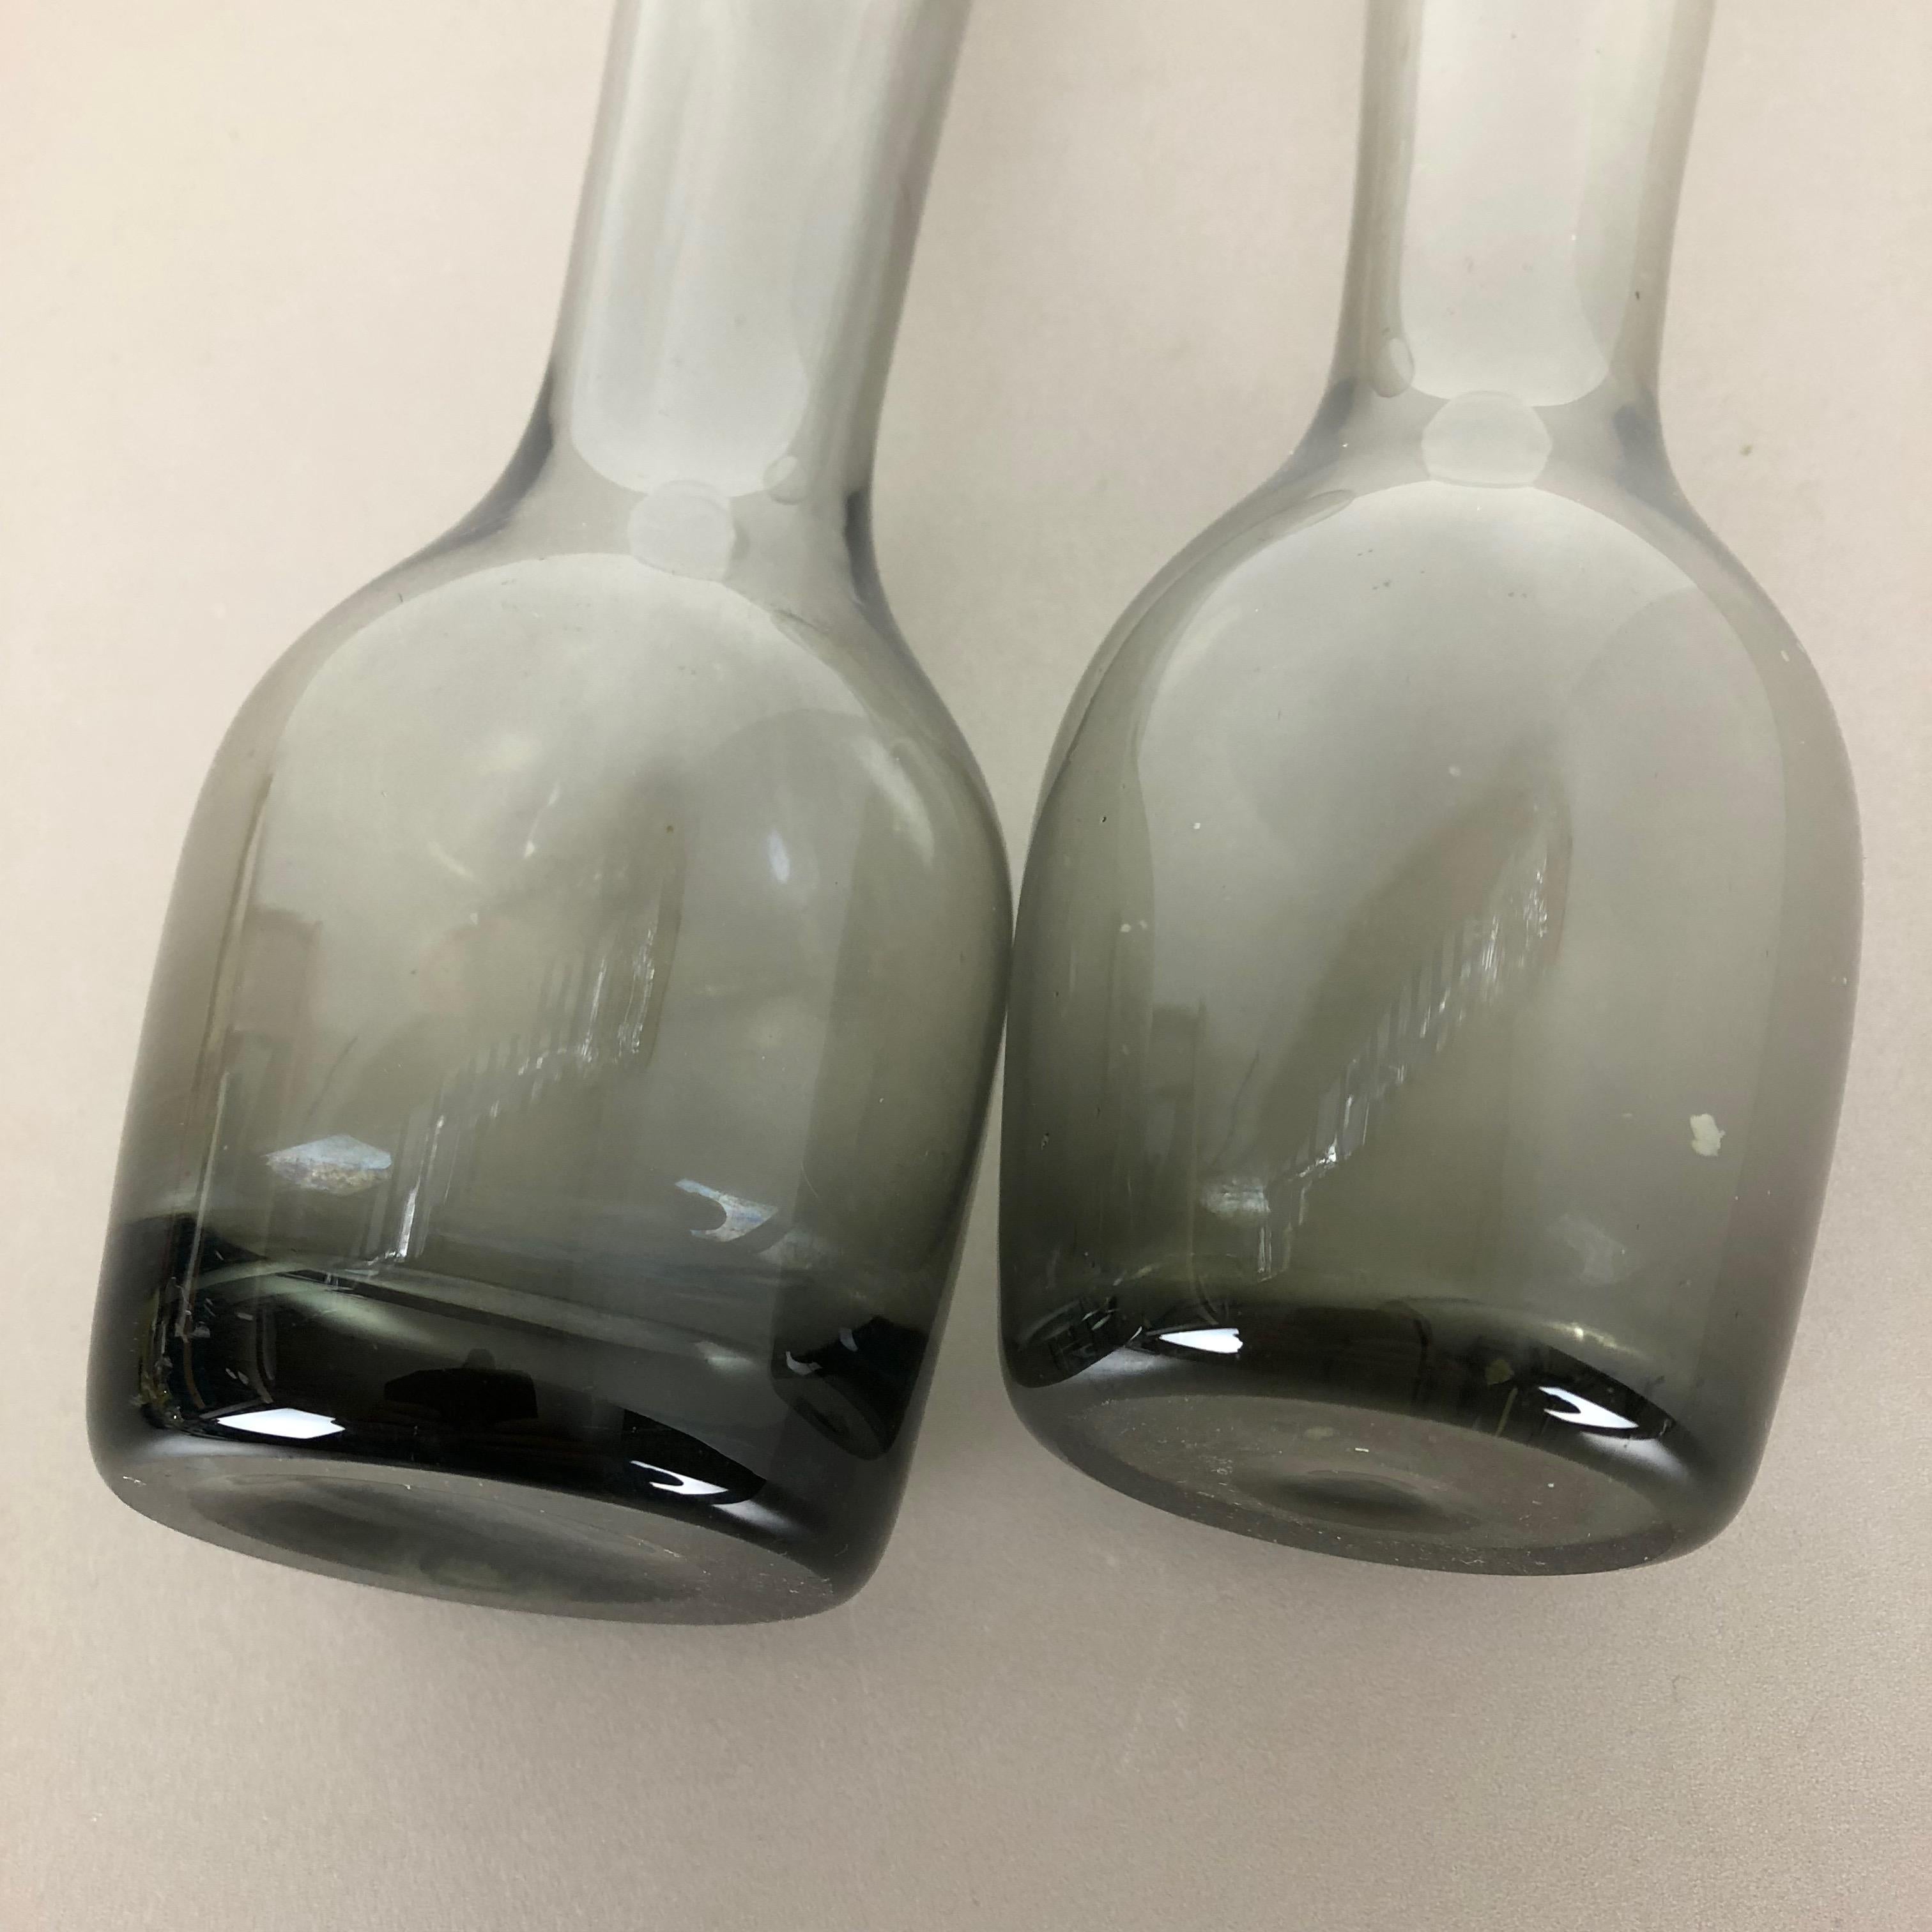 Vintage 1960s Set of 2 Turmalin Vases by Wilhelm Wagenfeld for WMF, Germany 10